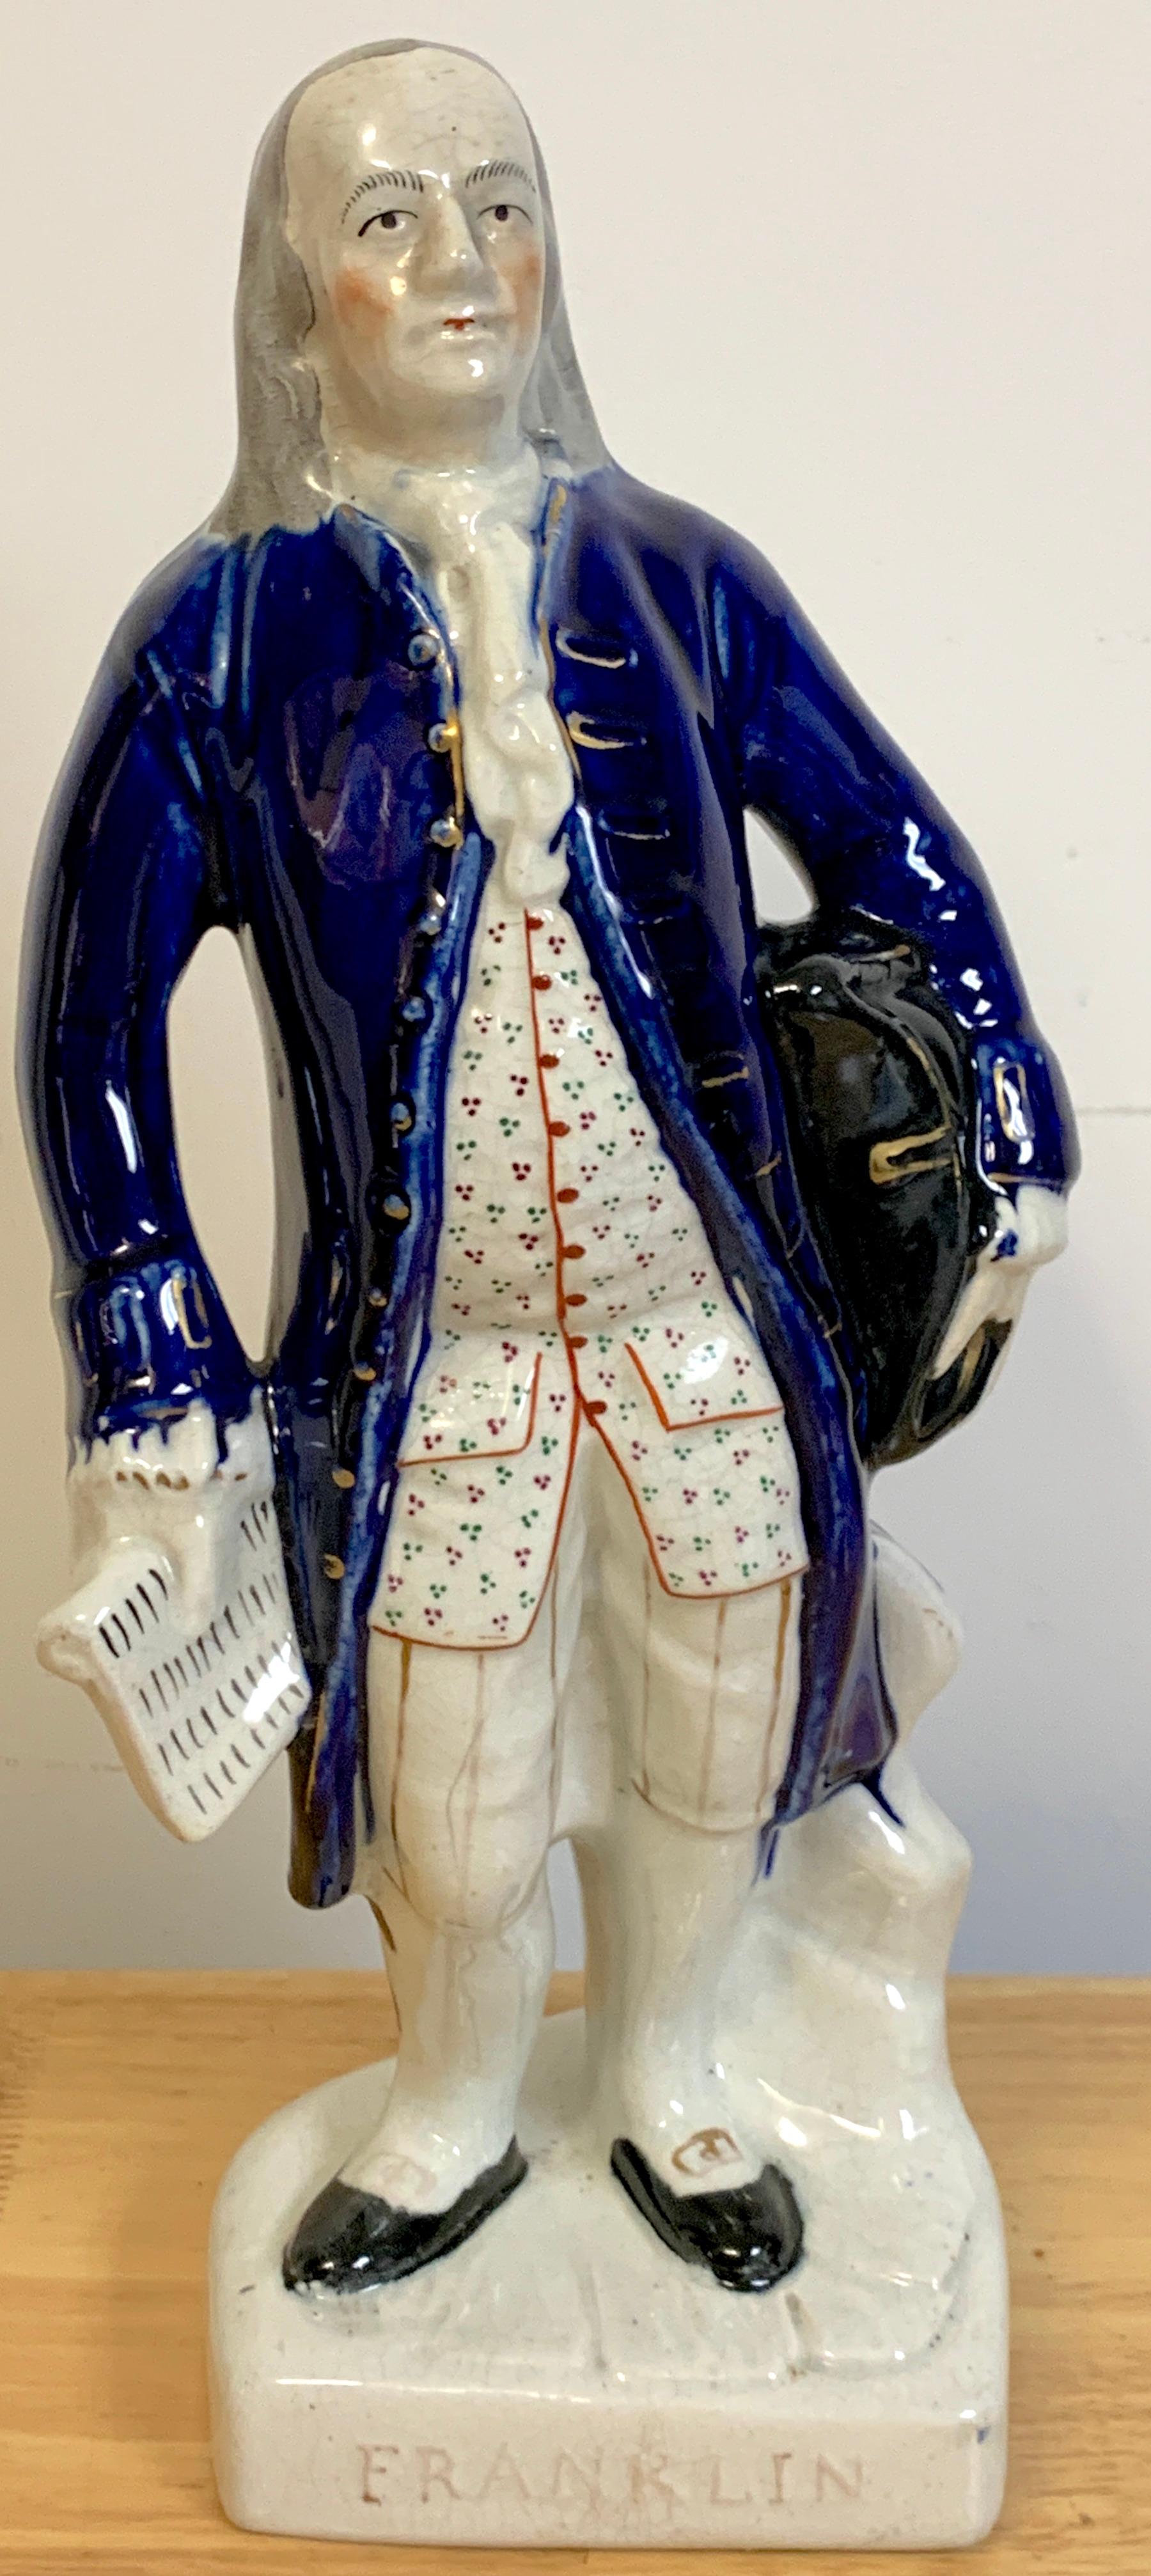 Staffordshire portrait figure of standing Franklin, Circa 1850
Depicting Ben Franklin before a tree-stump, holding a tricorne hat against his left hip, a document in his right hand, wearing a blue coat correctly titled FRANKLIN

Staff Franklin